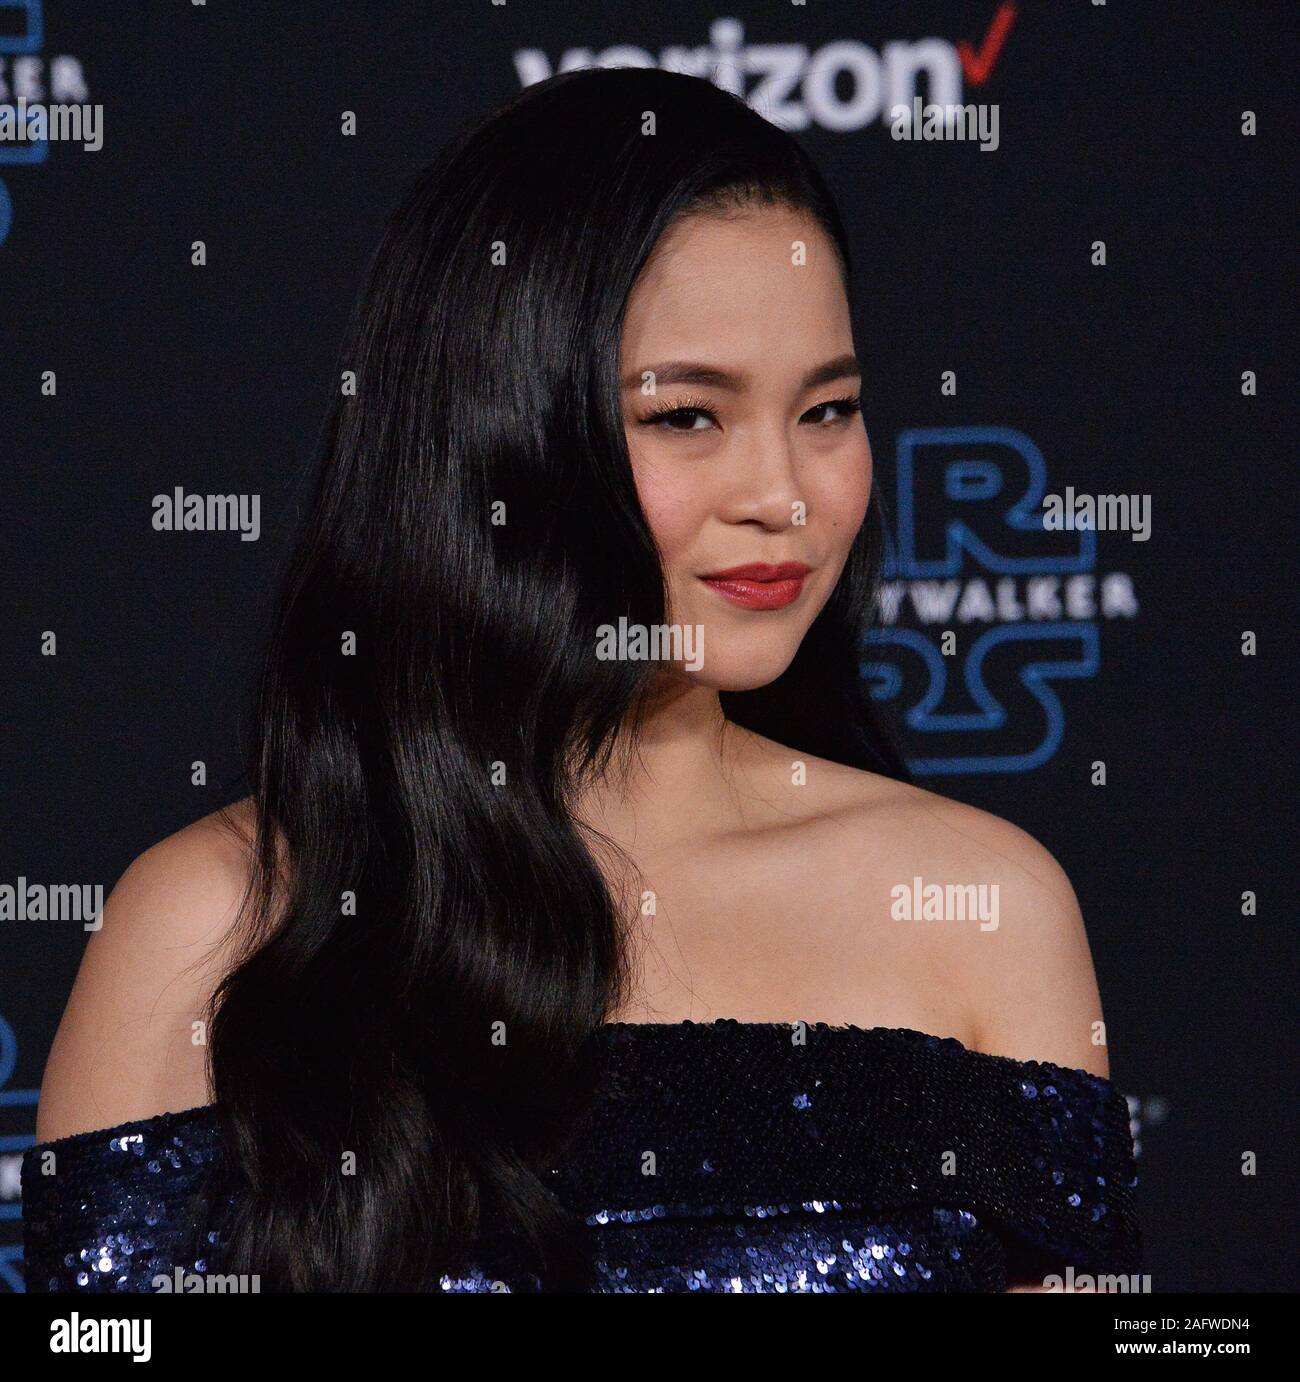 Los Angeles, United States. 17th Dec, 2019. Cast member Kelly Marie Tran attend sthe premiere the motion picture sci-fi fantasy 'Star Wars: The Rise of Skywalker' at the TCL Chinese Theatre in the Hollywood section of Los Angeles on Monday, December 16, 2019. Storyline: The surviving Resistance faces the First Order once more in the final chapter of the Skywalker saga. Photo by Jim Ruymen/UPI Credit: UPI/Alamy Live News Stock Photo